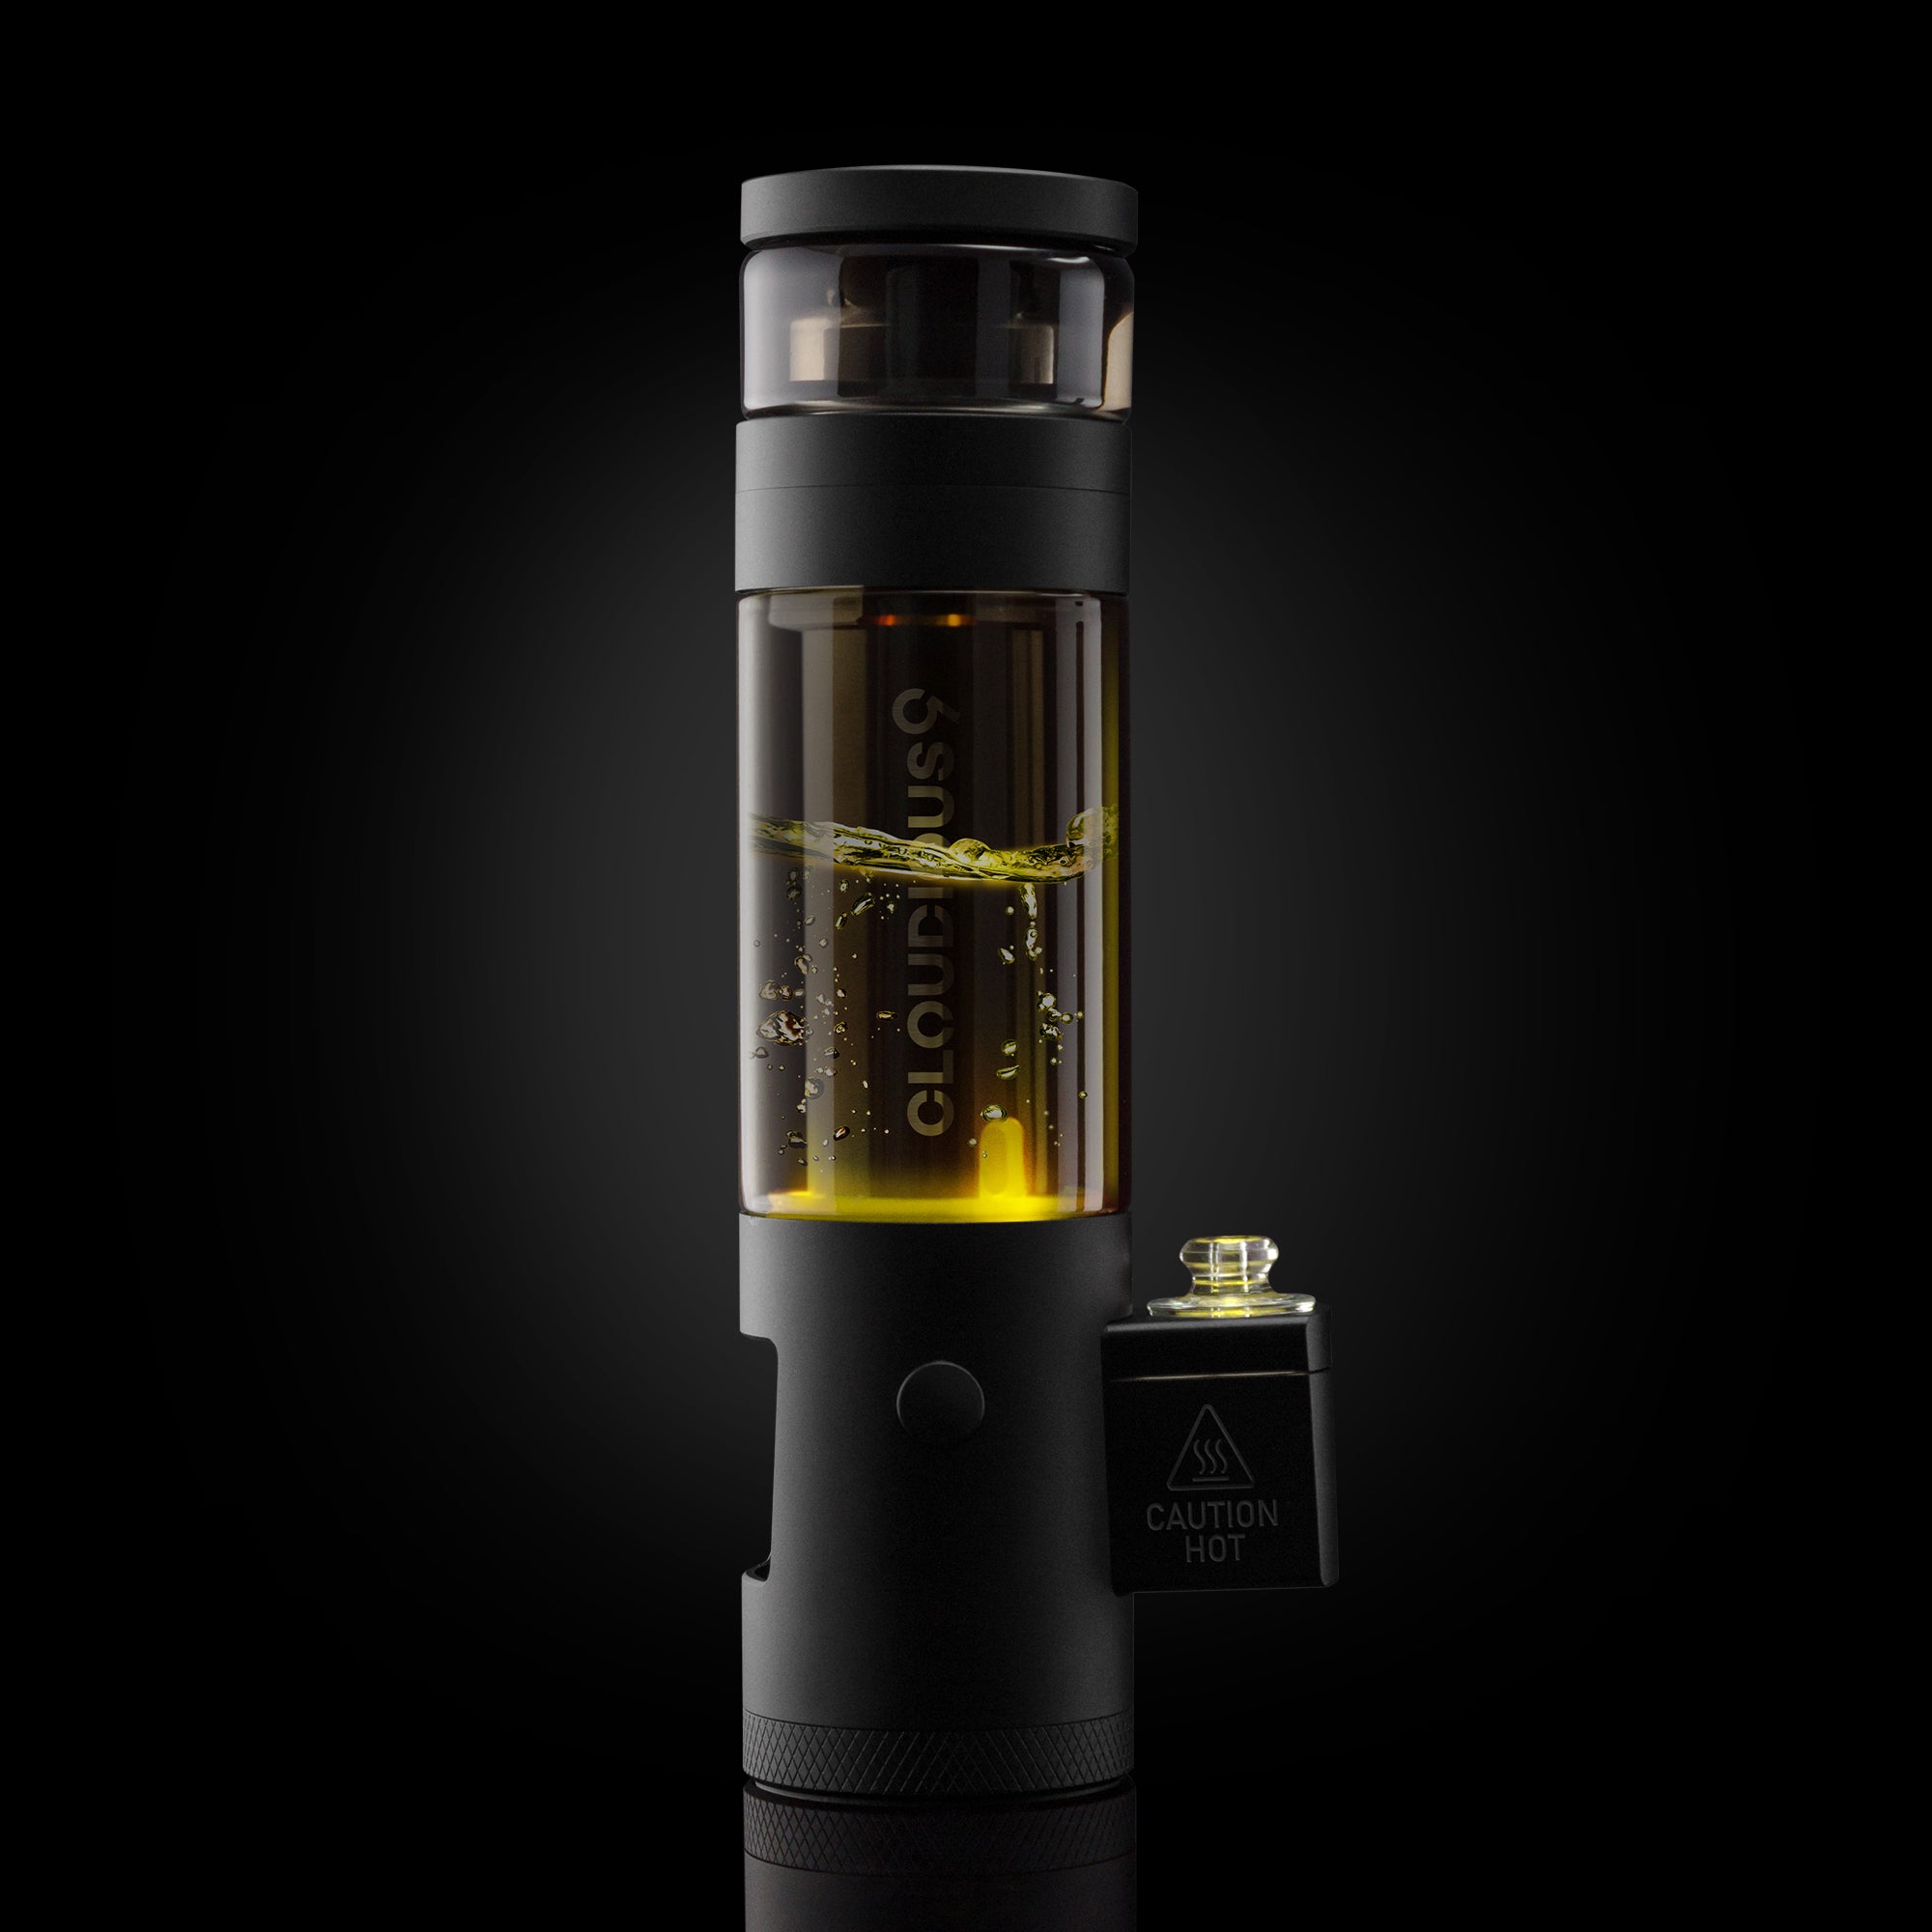 The Auto9 - Fully Automatic Grinder - Cloudious9